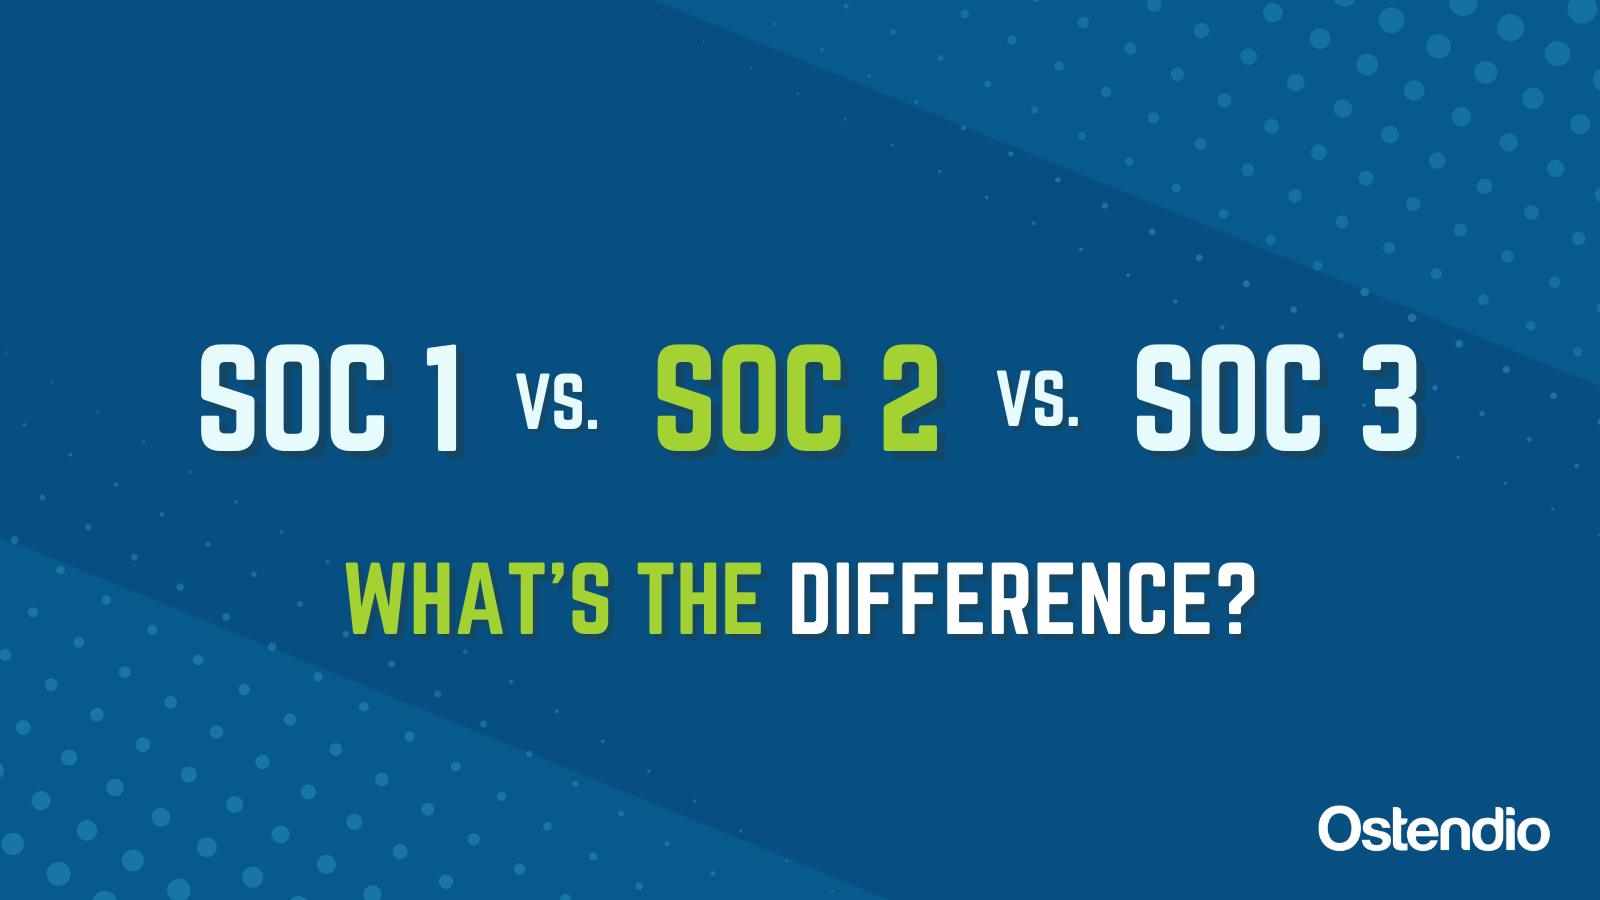 The Difference Between SOC 1, SOC 2 and SOC 3